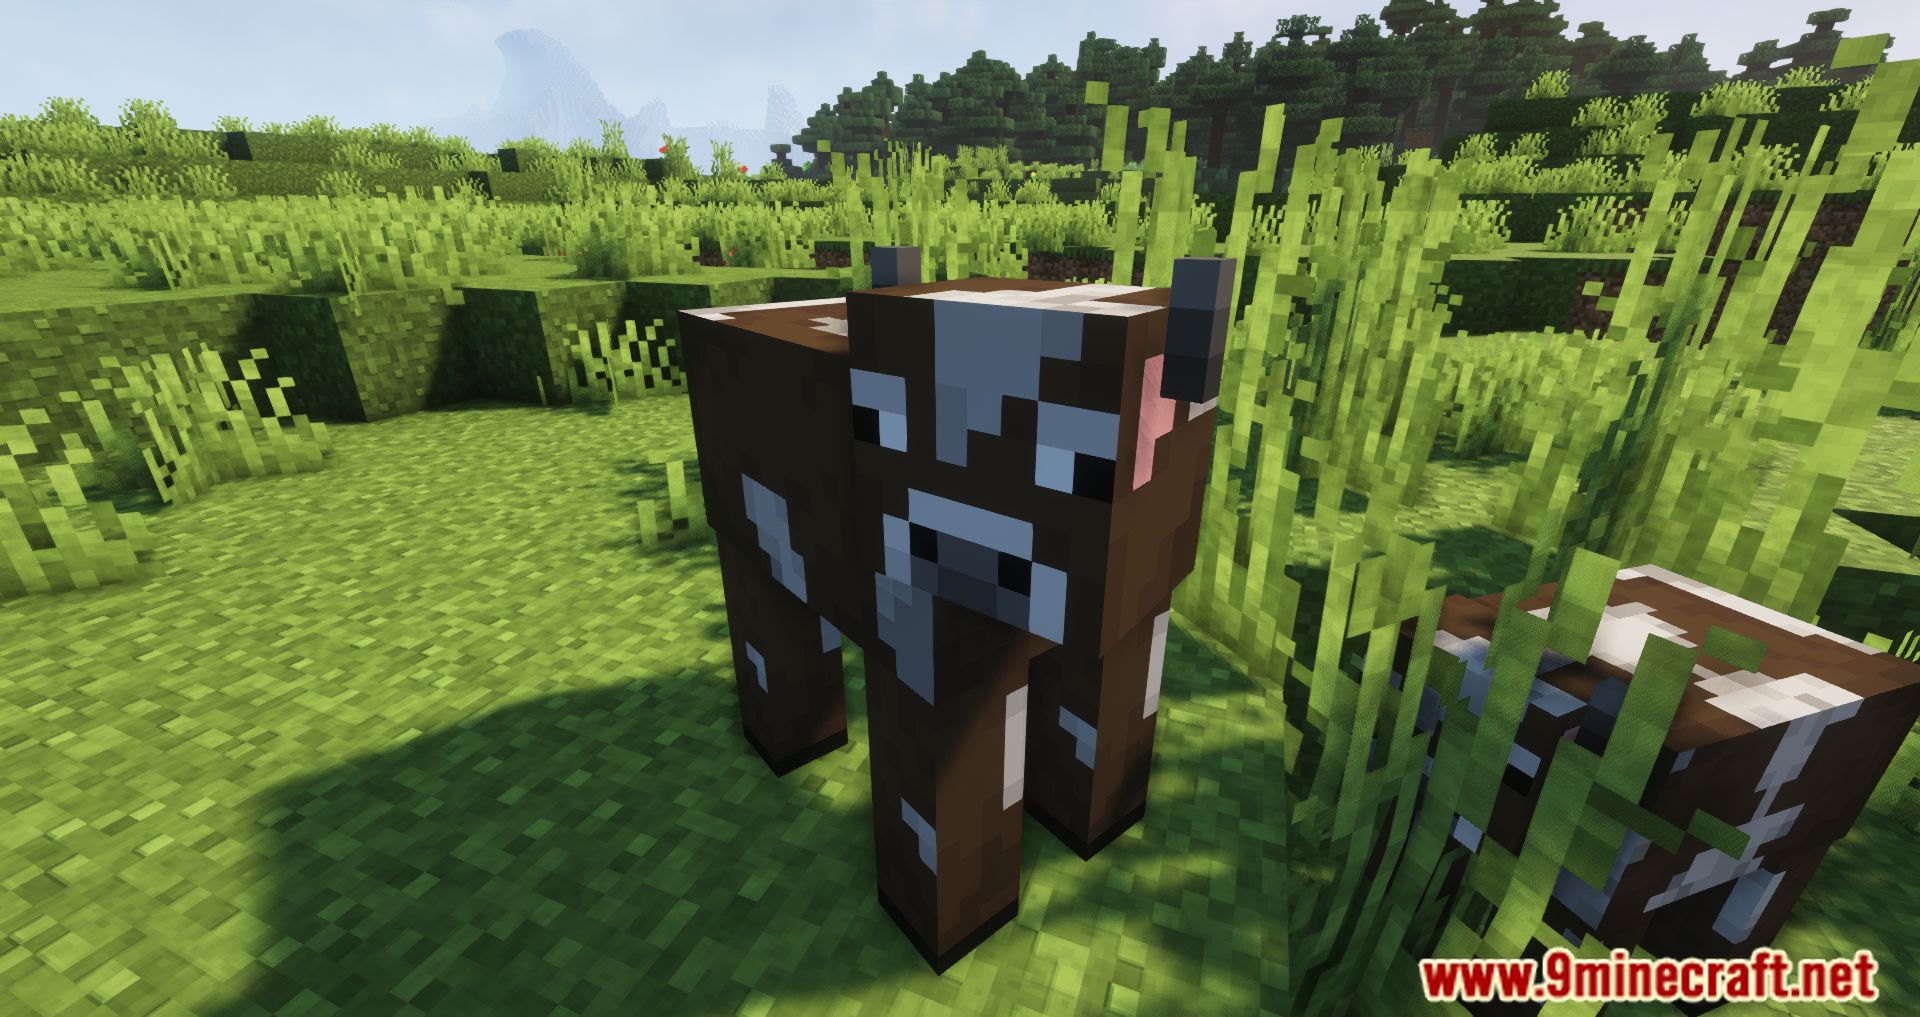 Well-Behaved Mobs Mod (1.16.5, 1.15.2) - Minor Tweaks To The Behavior Of A Few Mobs 2